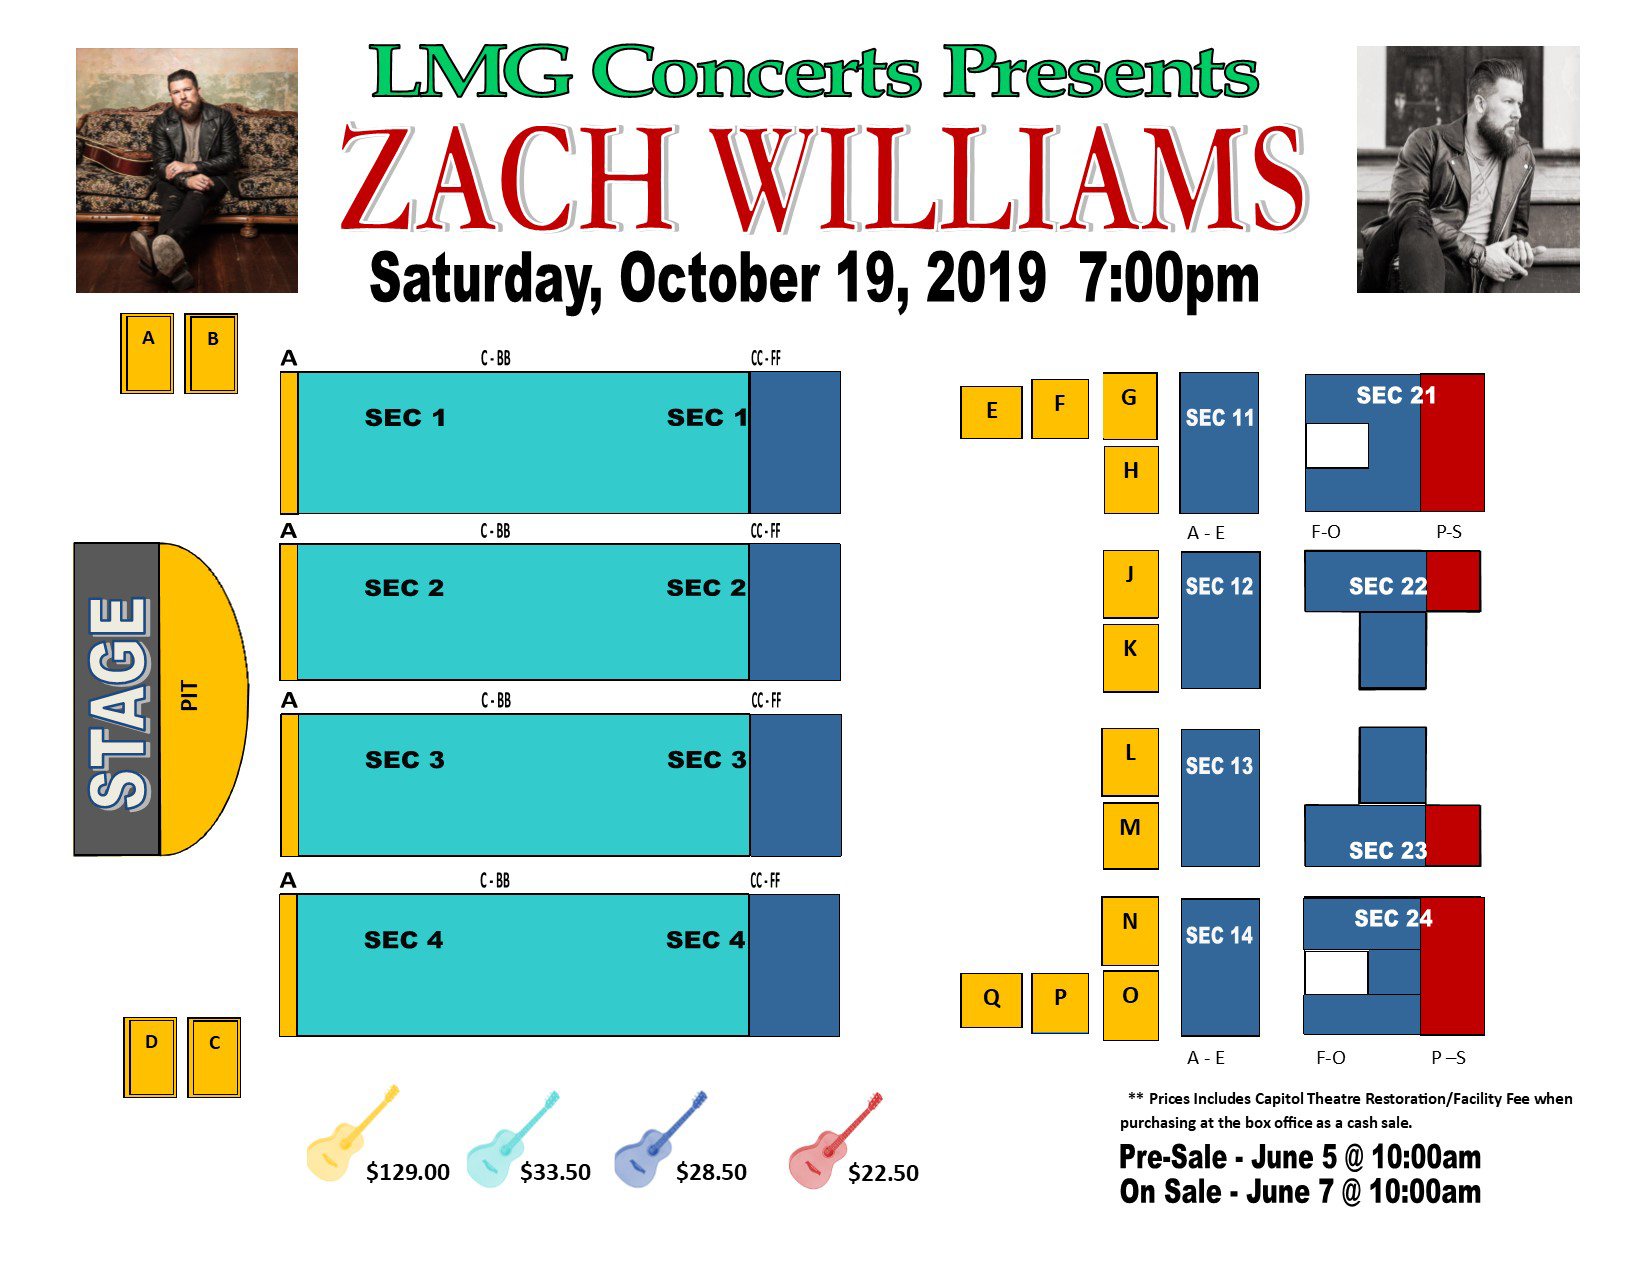 The Capitol Theatre Seating Chart